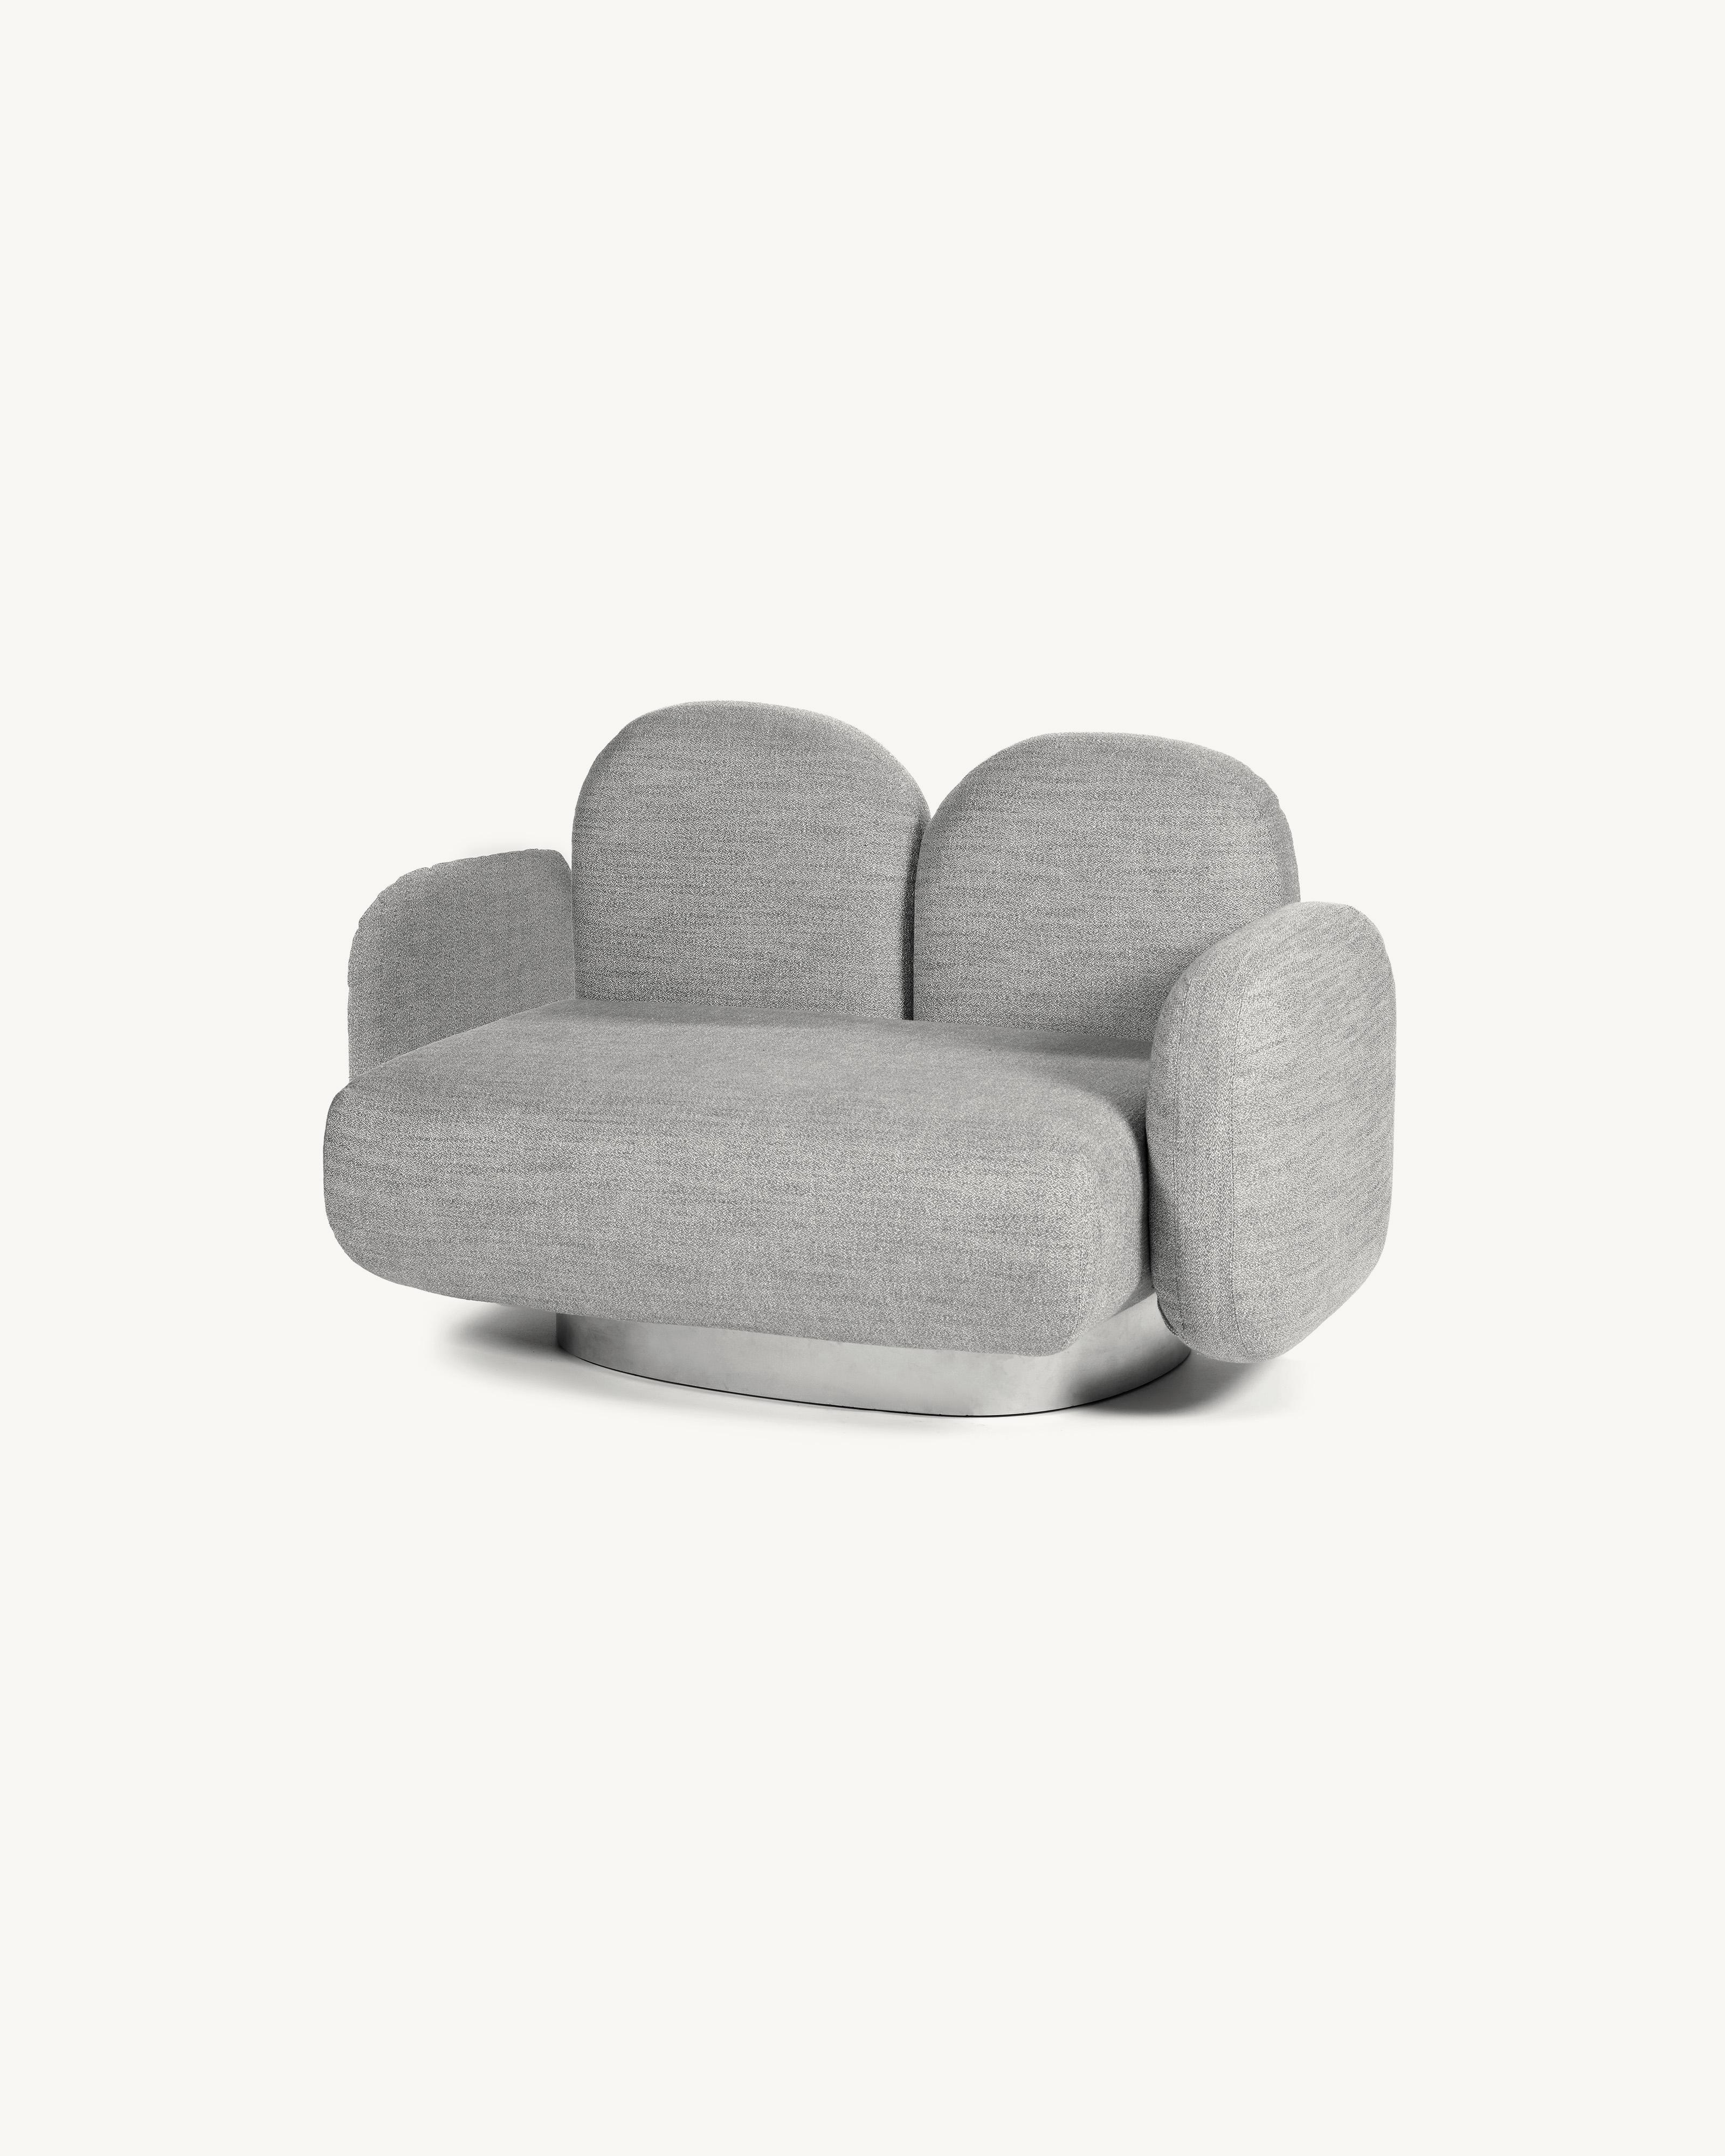 Contemporary Sofa 'Assemble' by Destroyers/Builders, 1 seater + 2 armrests For Sale 5